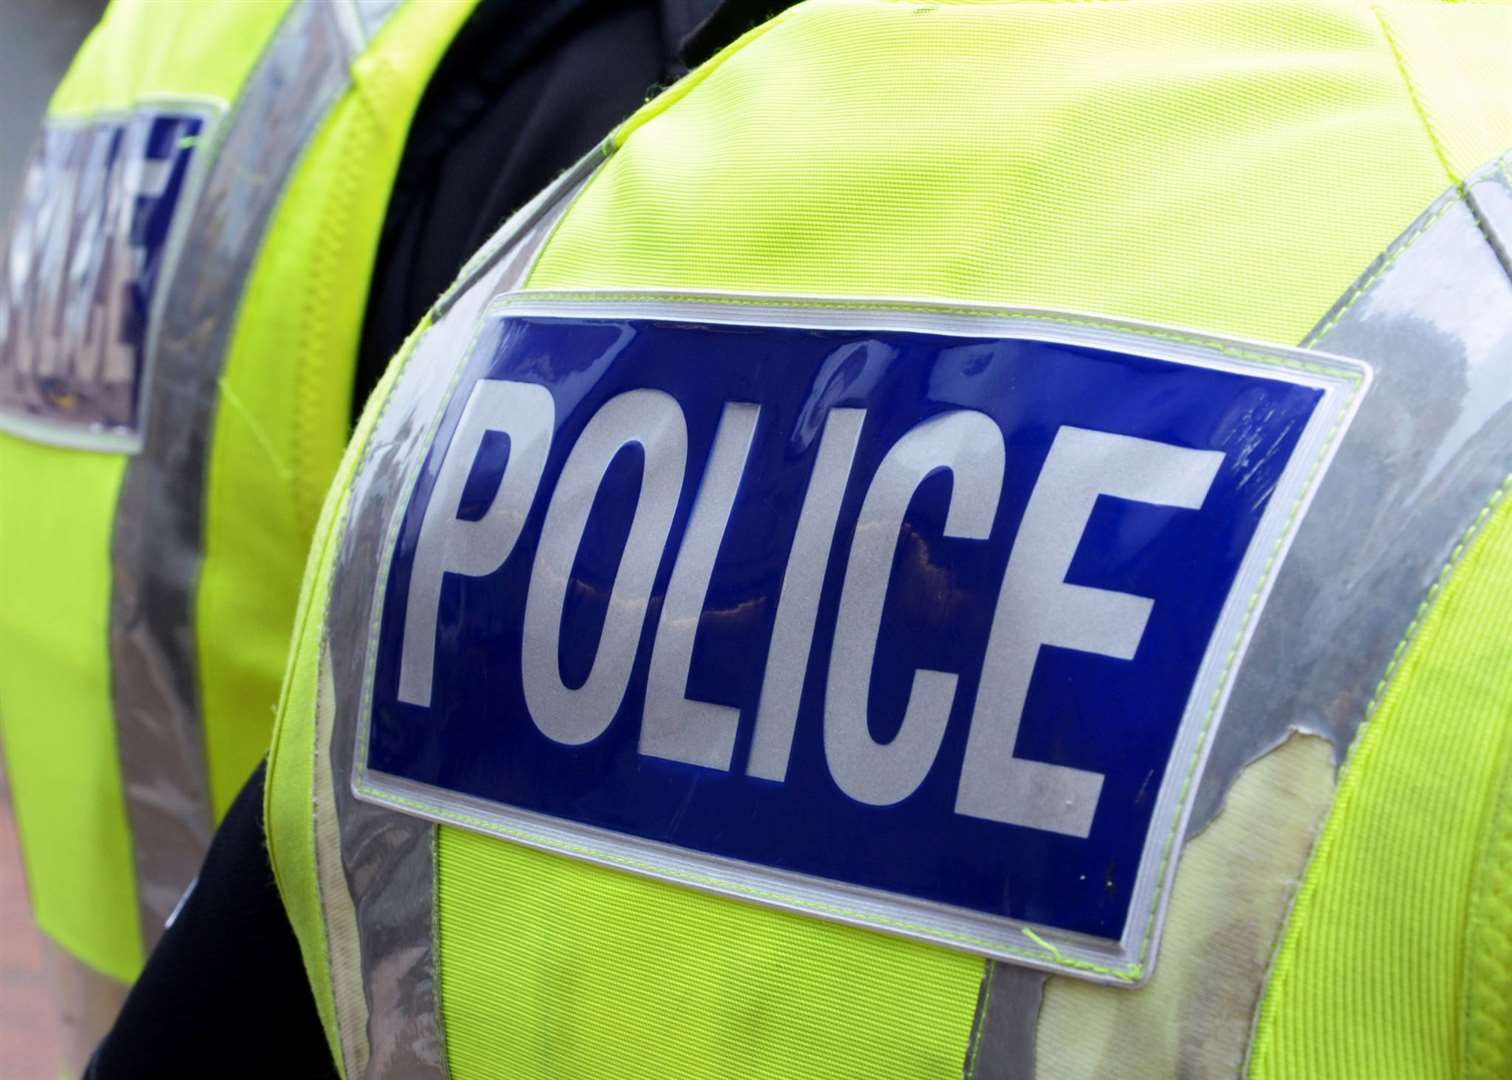 A man was arrested in connection with an incident which took place on Friday.